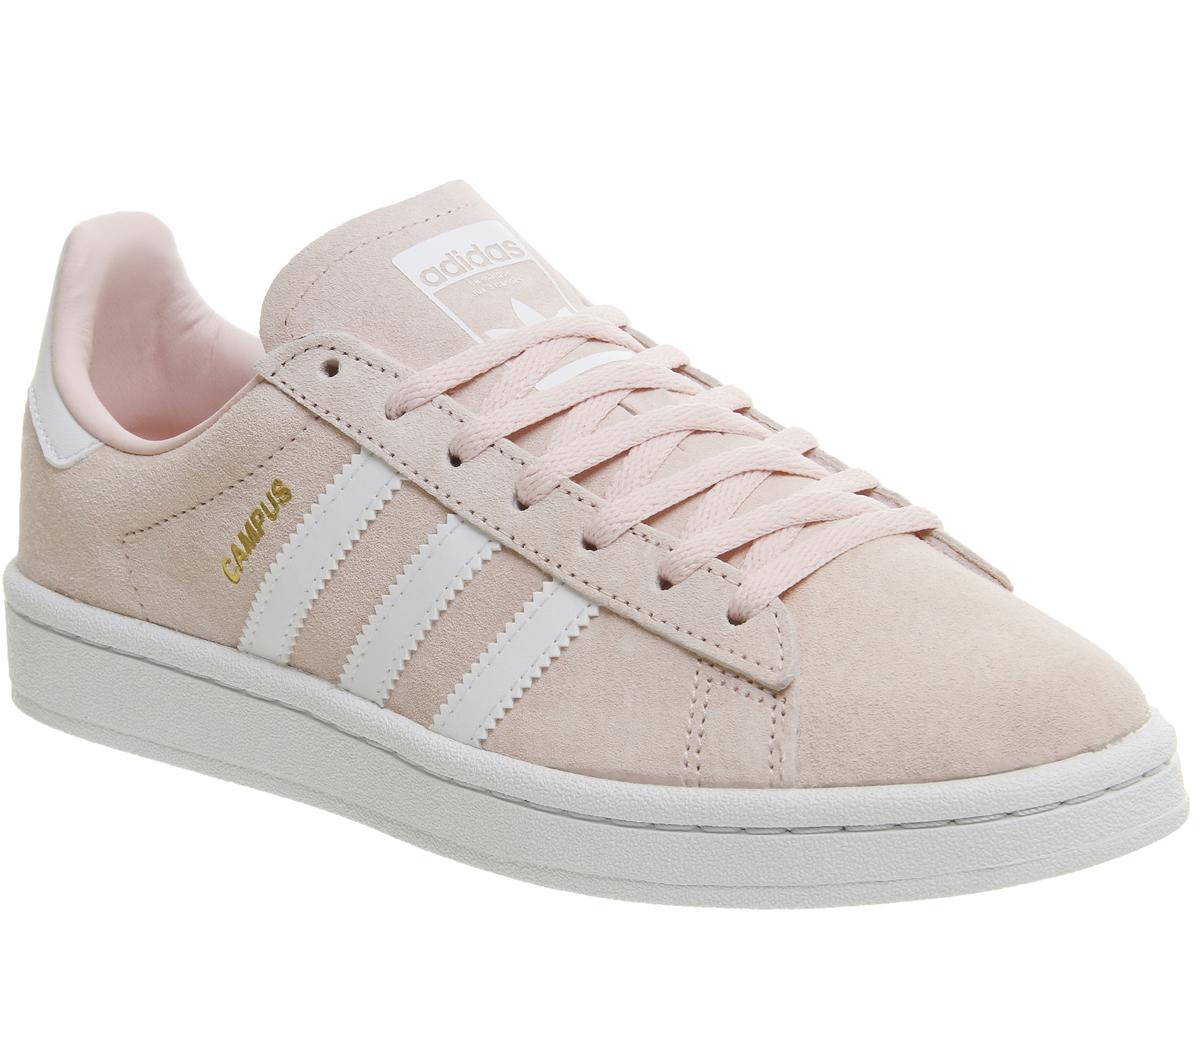 adidas Campus Trainers Icey Pink White 